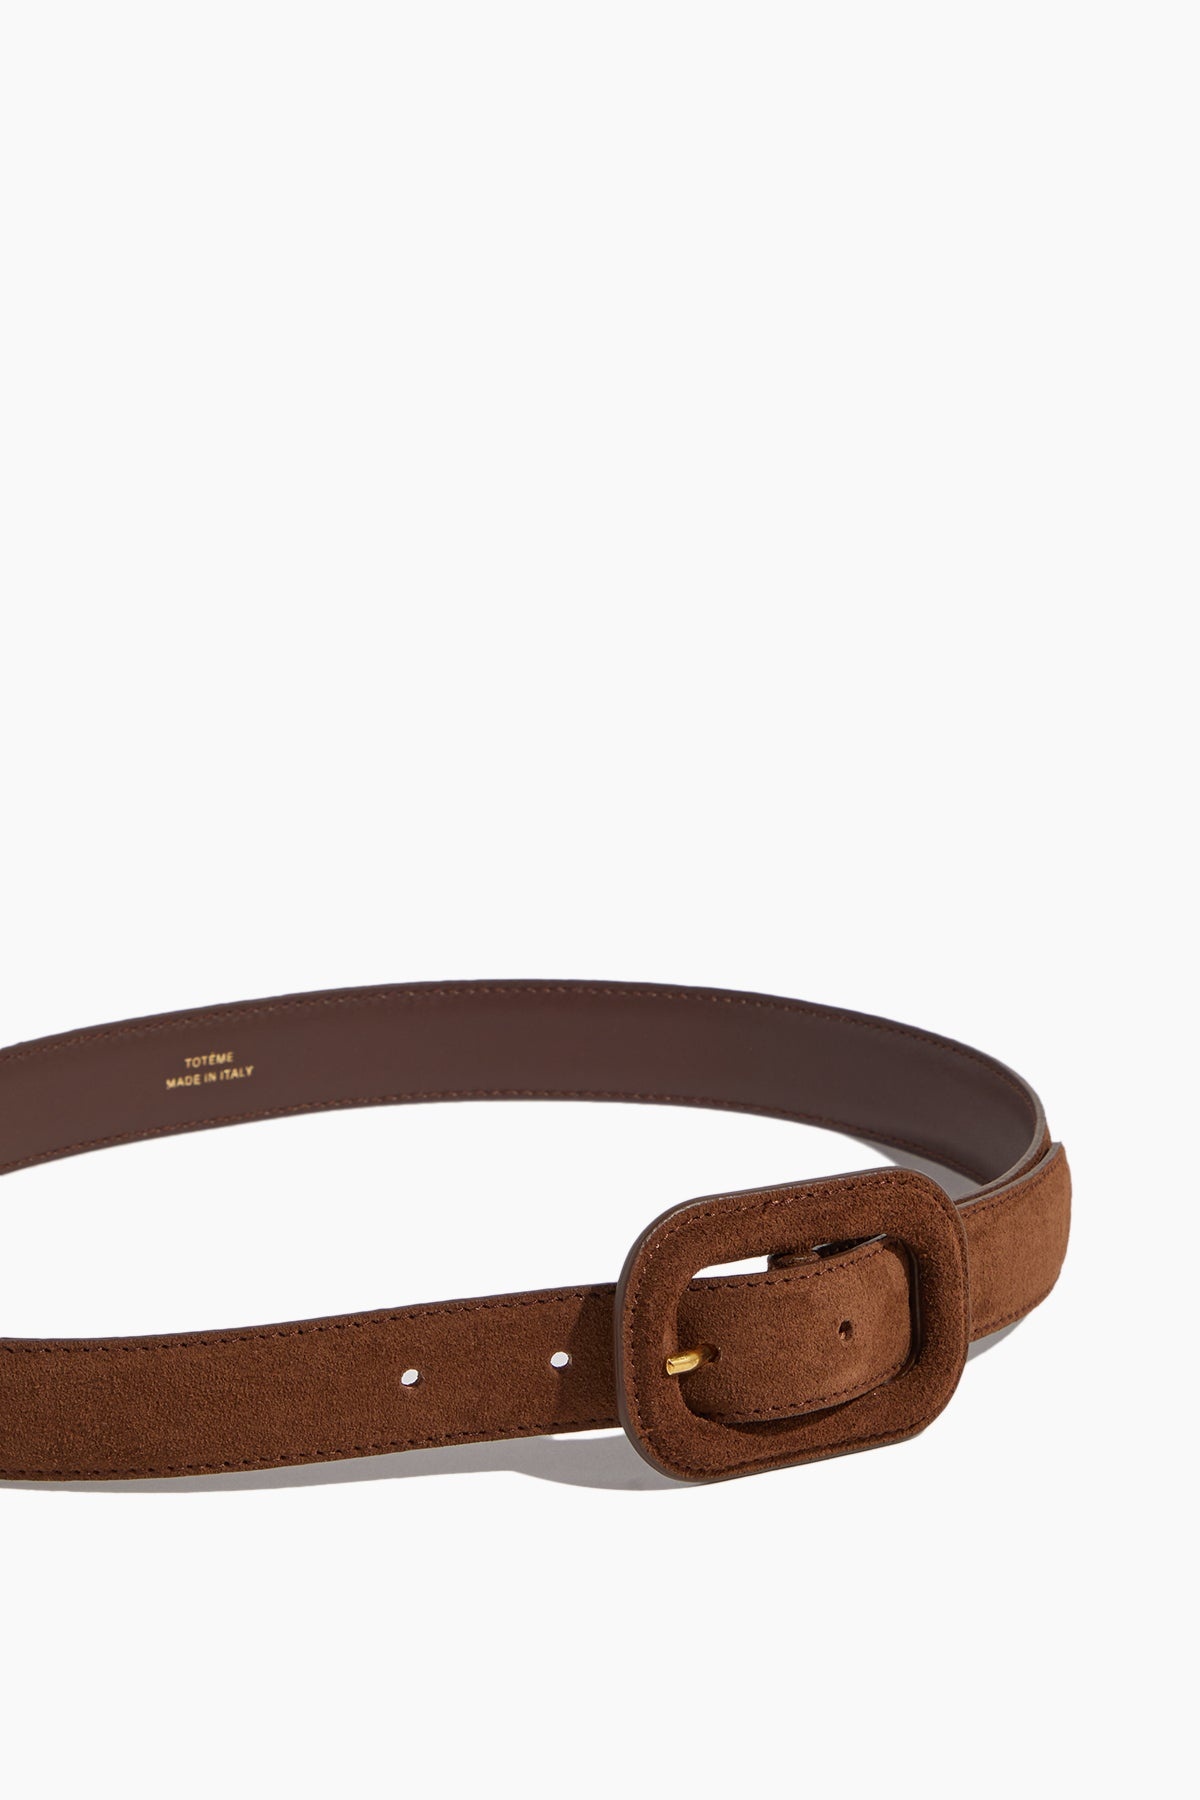 Covered Buckle Belt in Brown Suede - 3